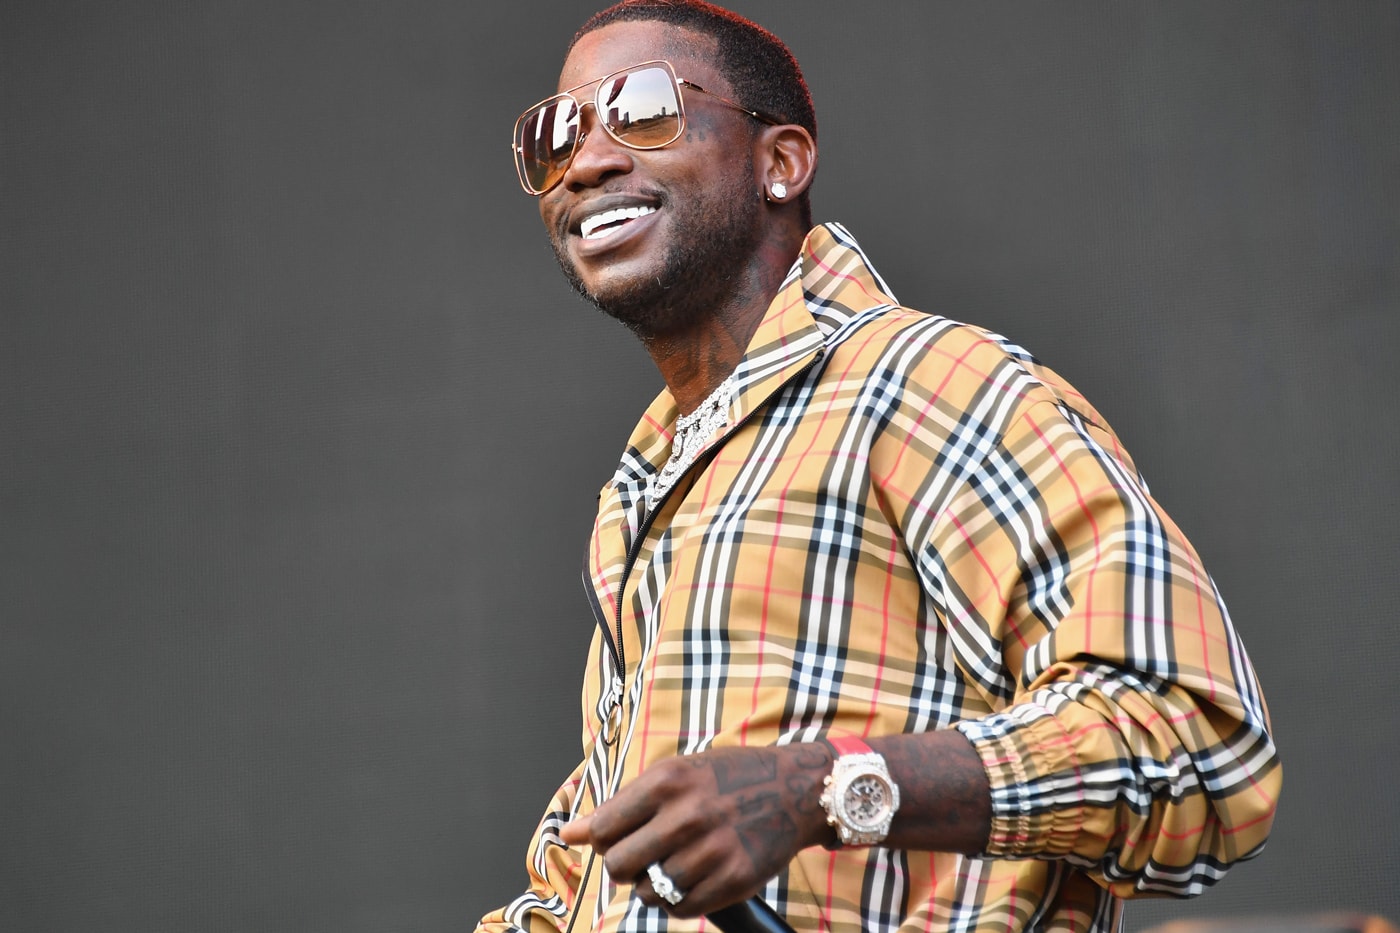 Gucci Mane's New Album Title References Migos' "Bad and Boujee"